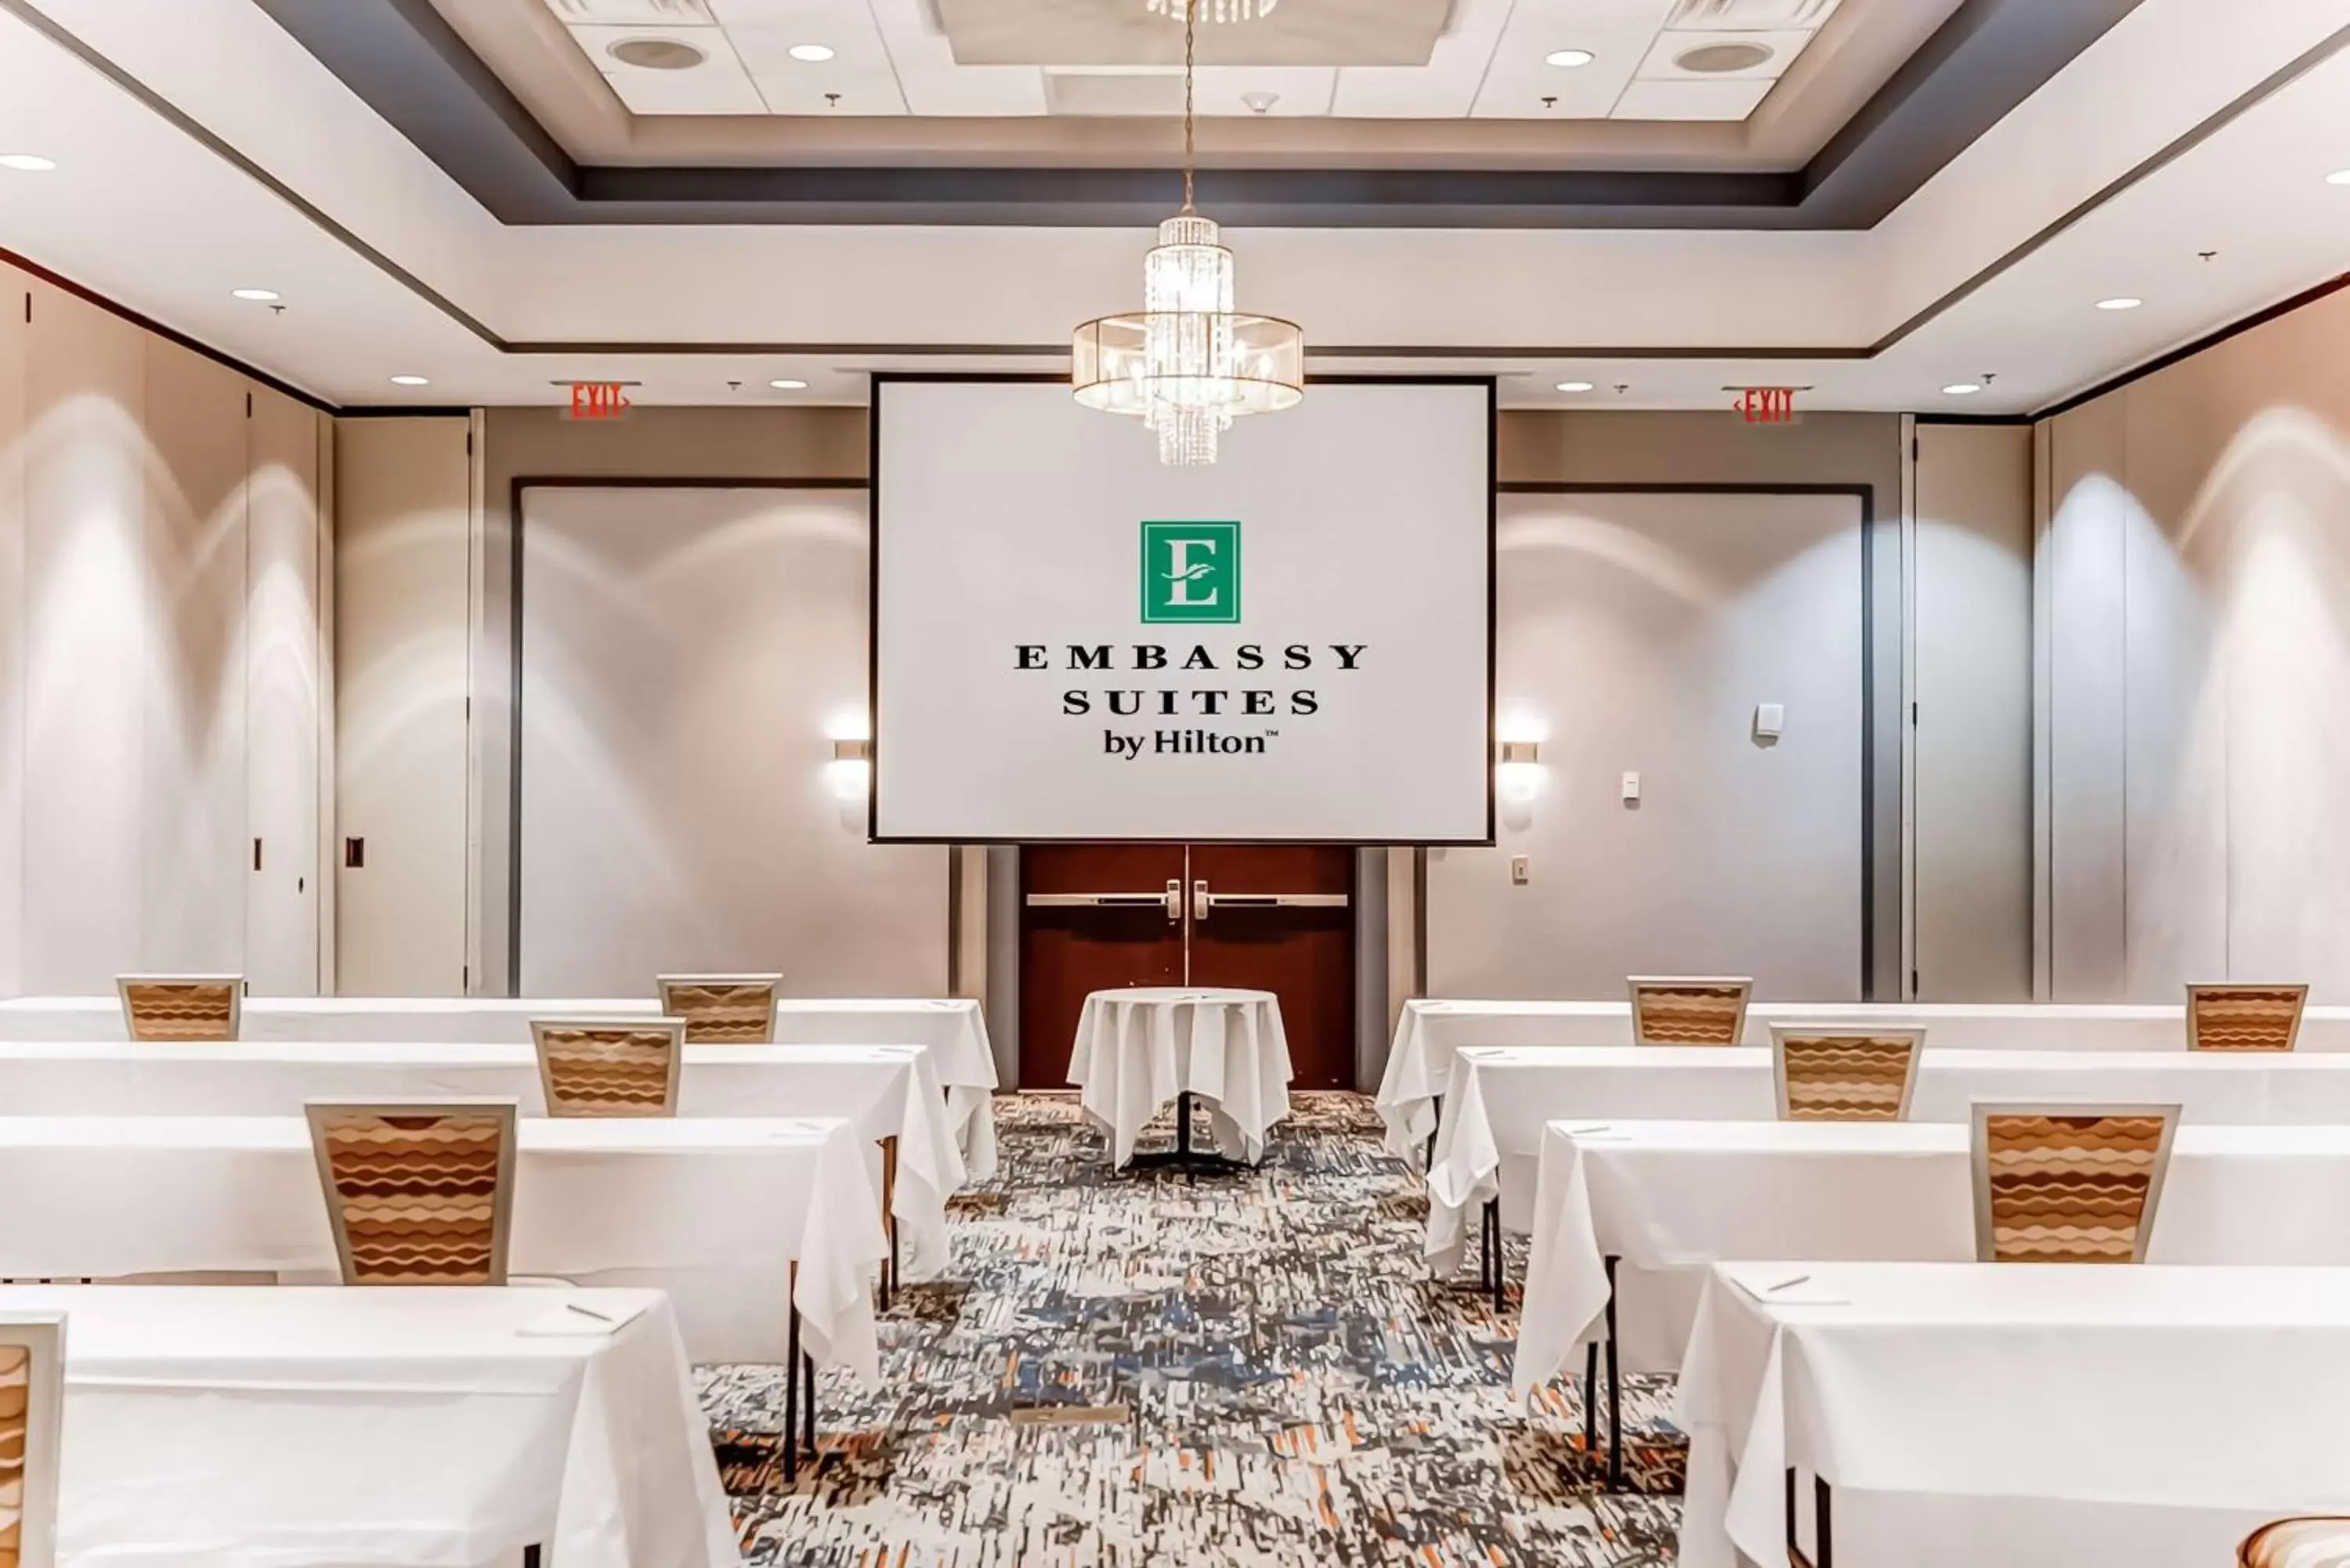 Meeting/conference room, Banquet Facilities in Embassy Suites Atlanta - Kennesaw Town Center